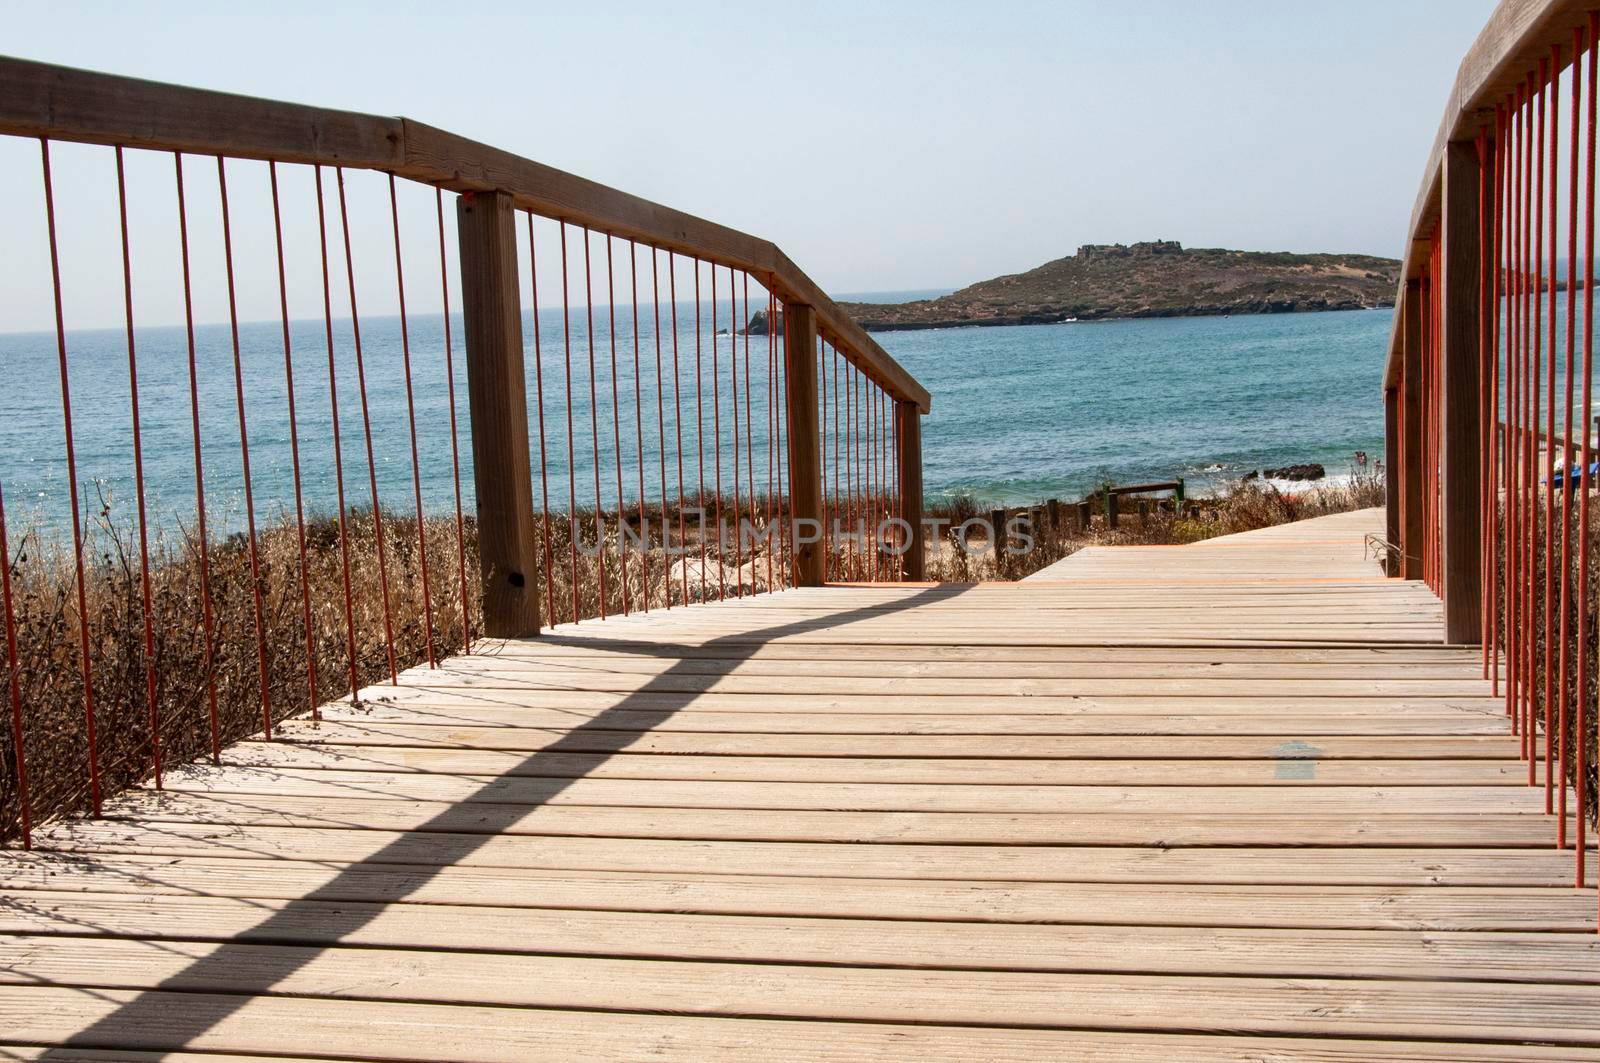 Wooden footpath on a beach entrance near Porto Covo, Portugal. Peach tree island in the background. by papatonic